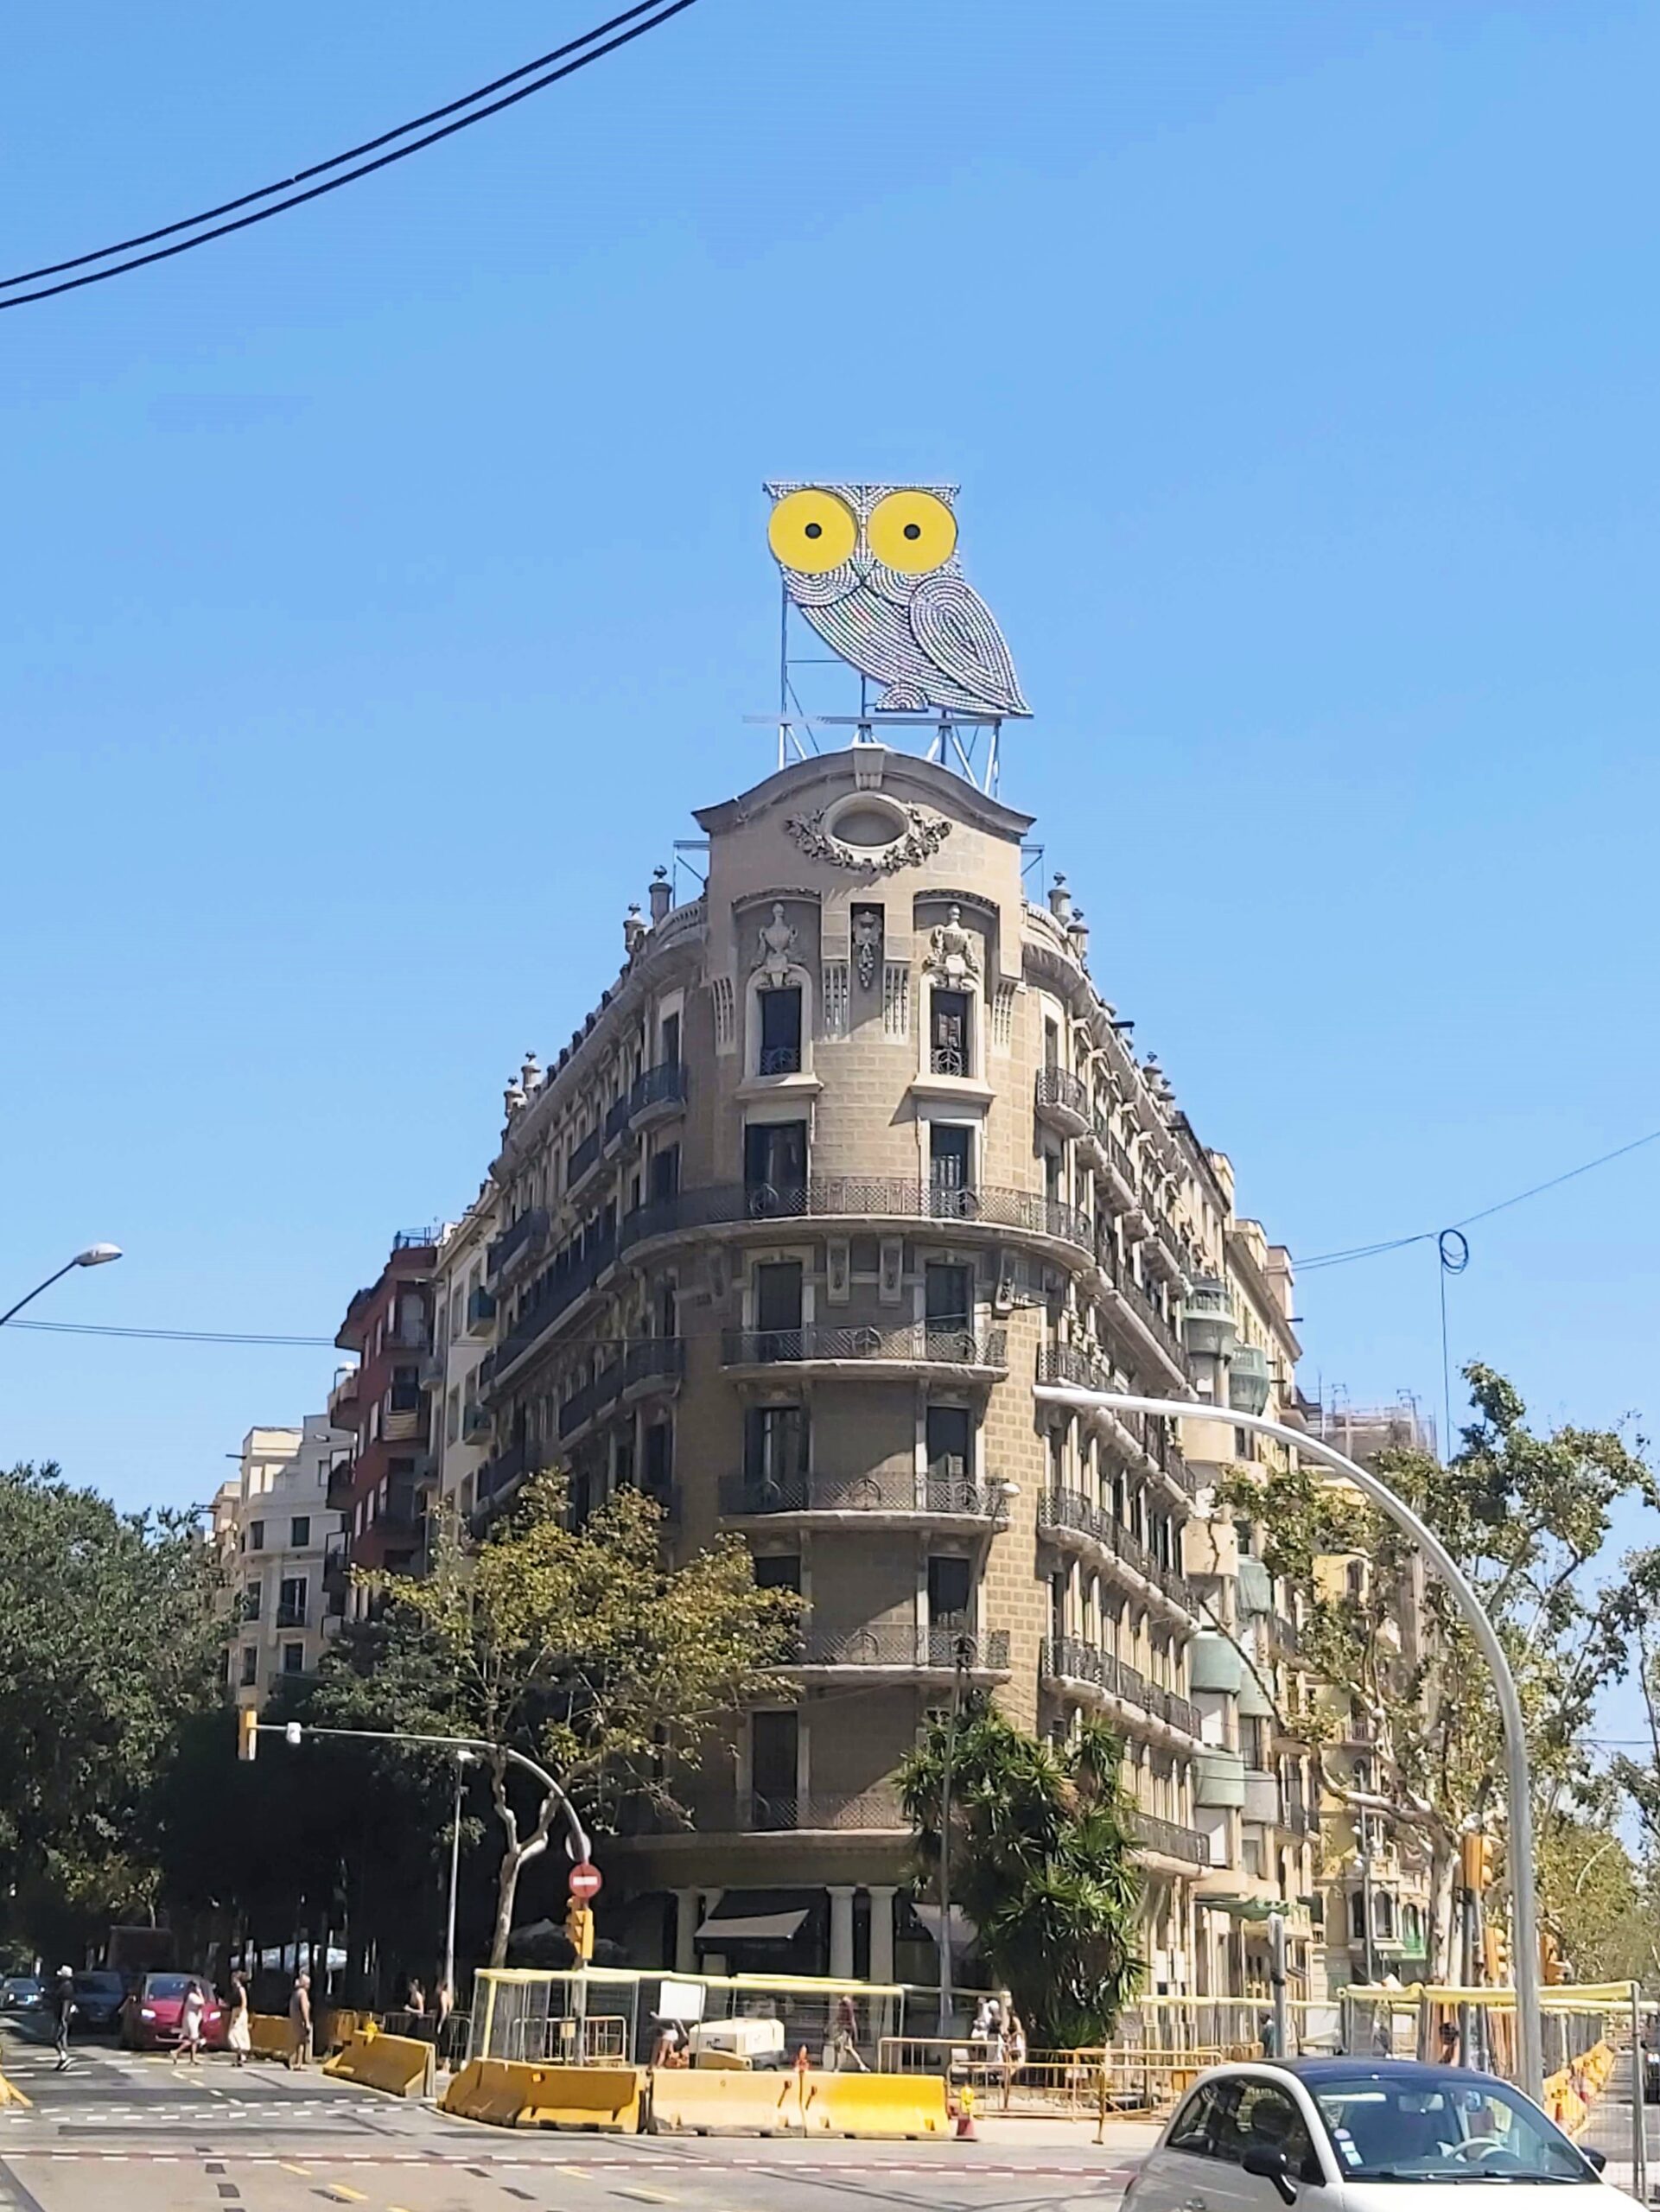 Artwork of an owl with large yellow eyes on top of a building in Spain, Barcelona